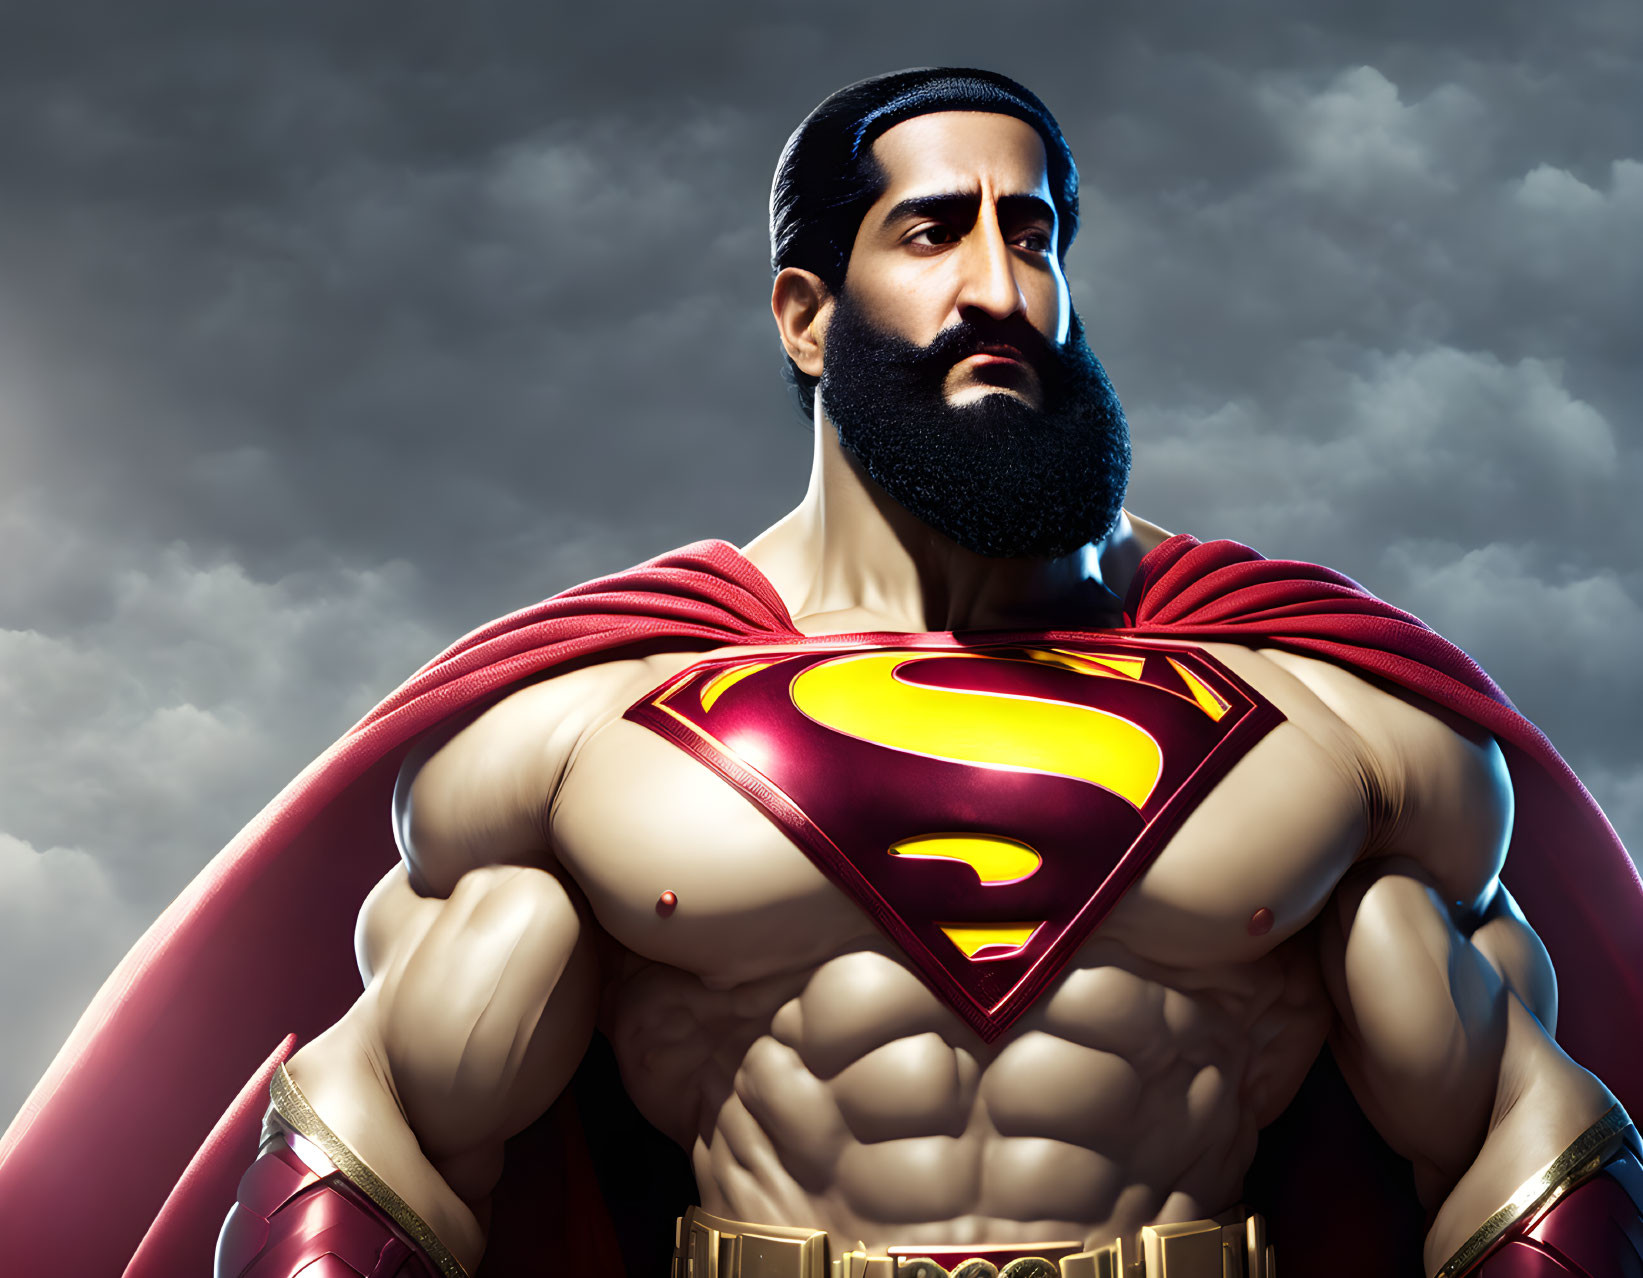 Superman with beard in classic costume under cloudy sky